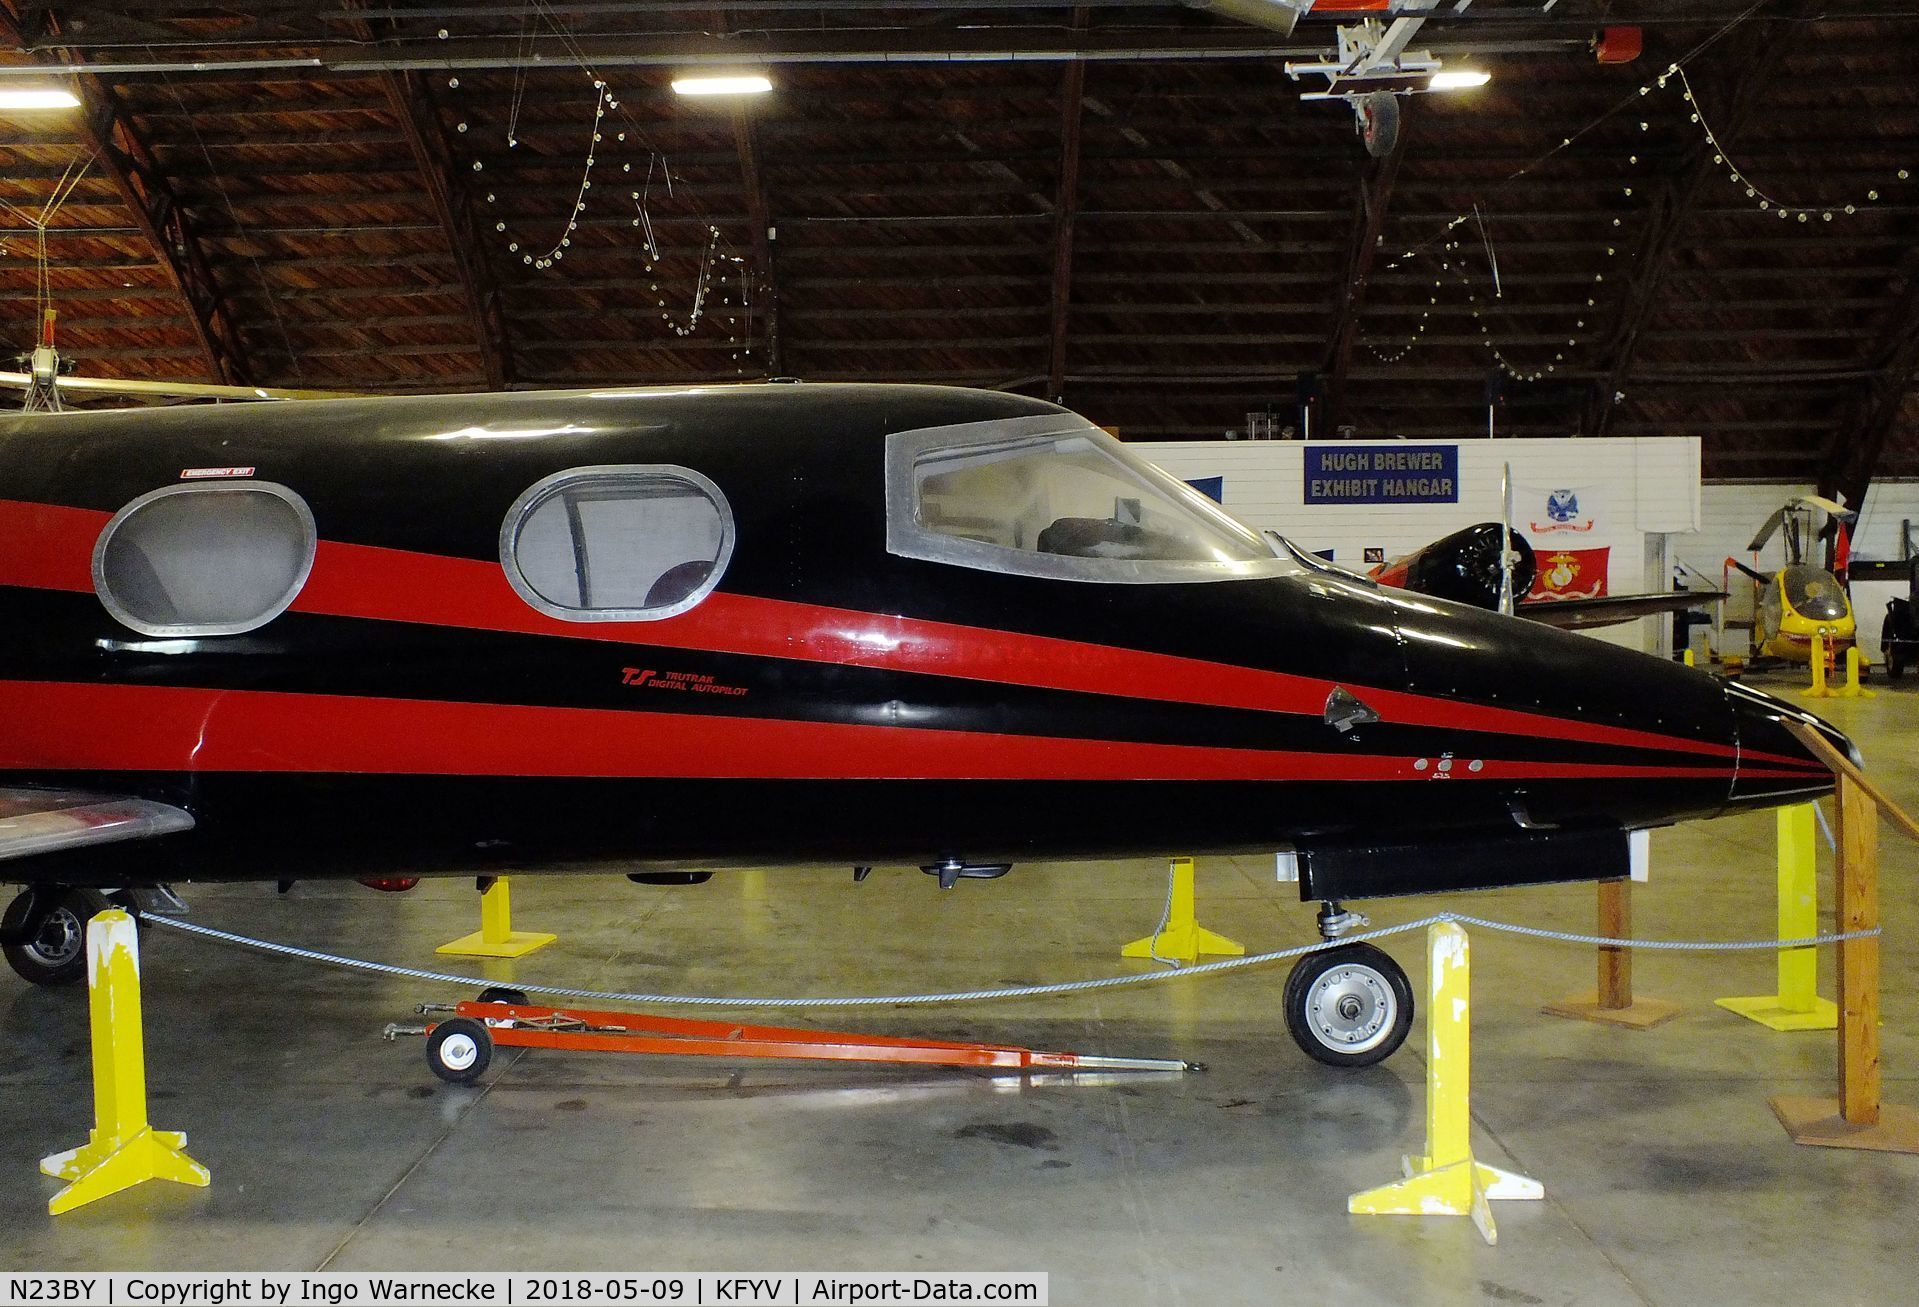 N23BY, 1965 Learjet 23 C/N 23-009, Learjet 23 at the Arkansas Air & Military Museum, Fayetteville AR